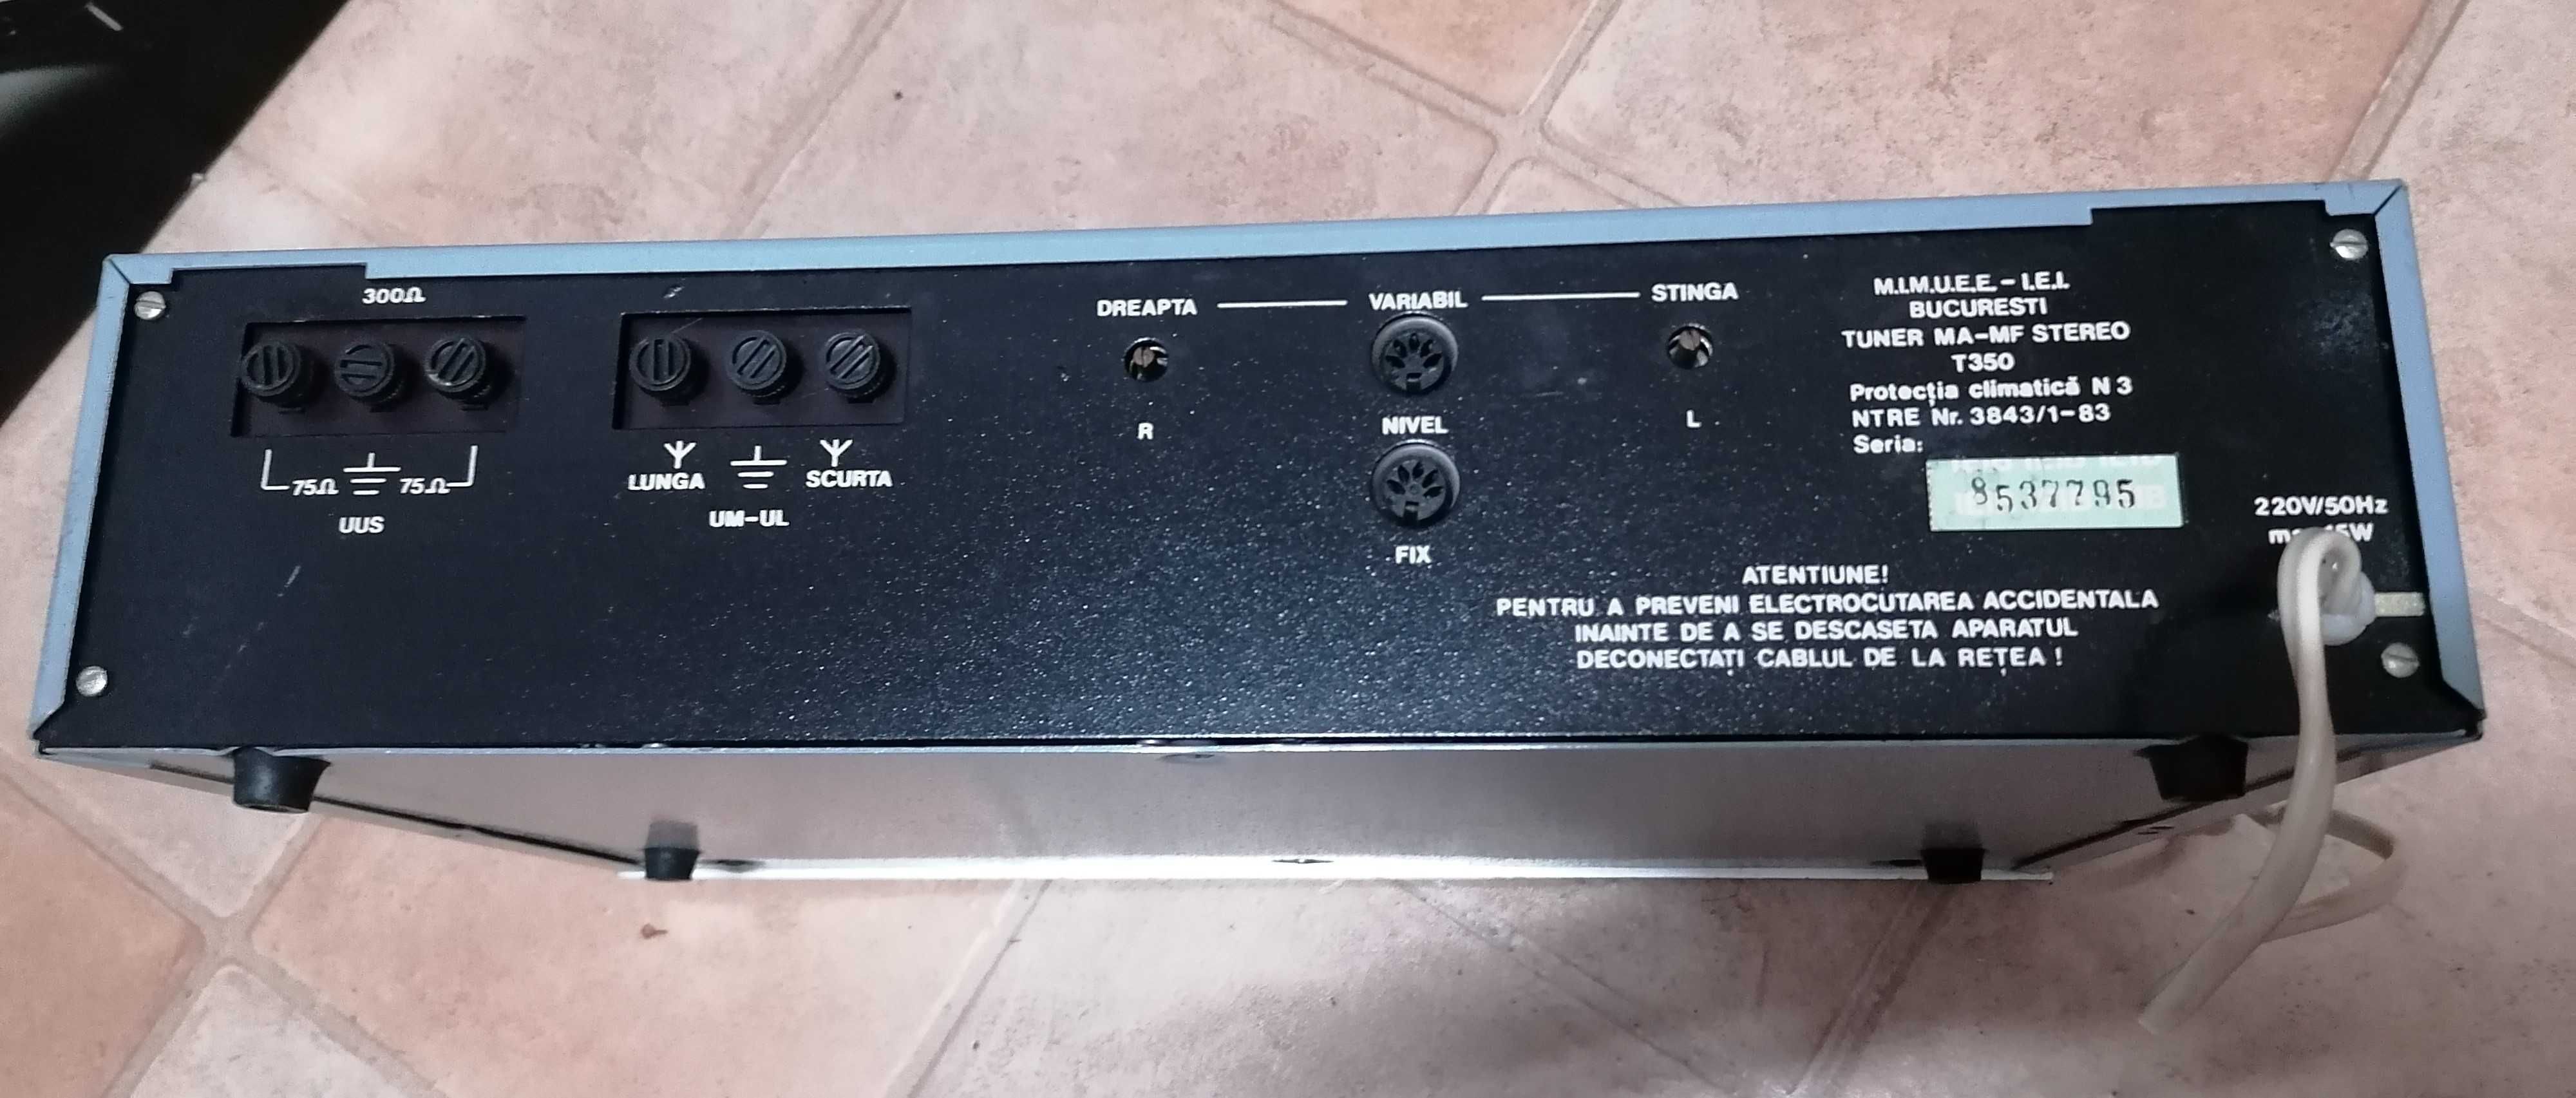 Tuner Stereo T350 Vintage